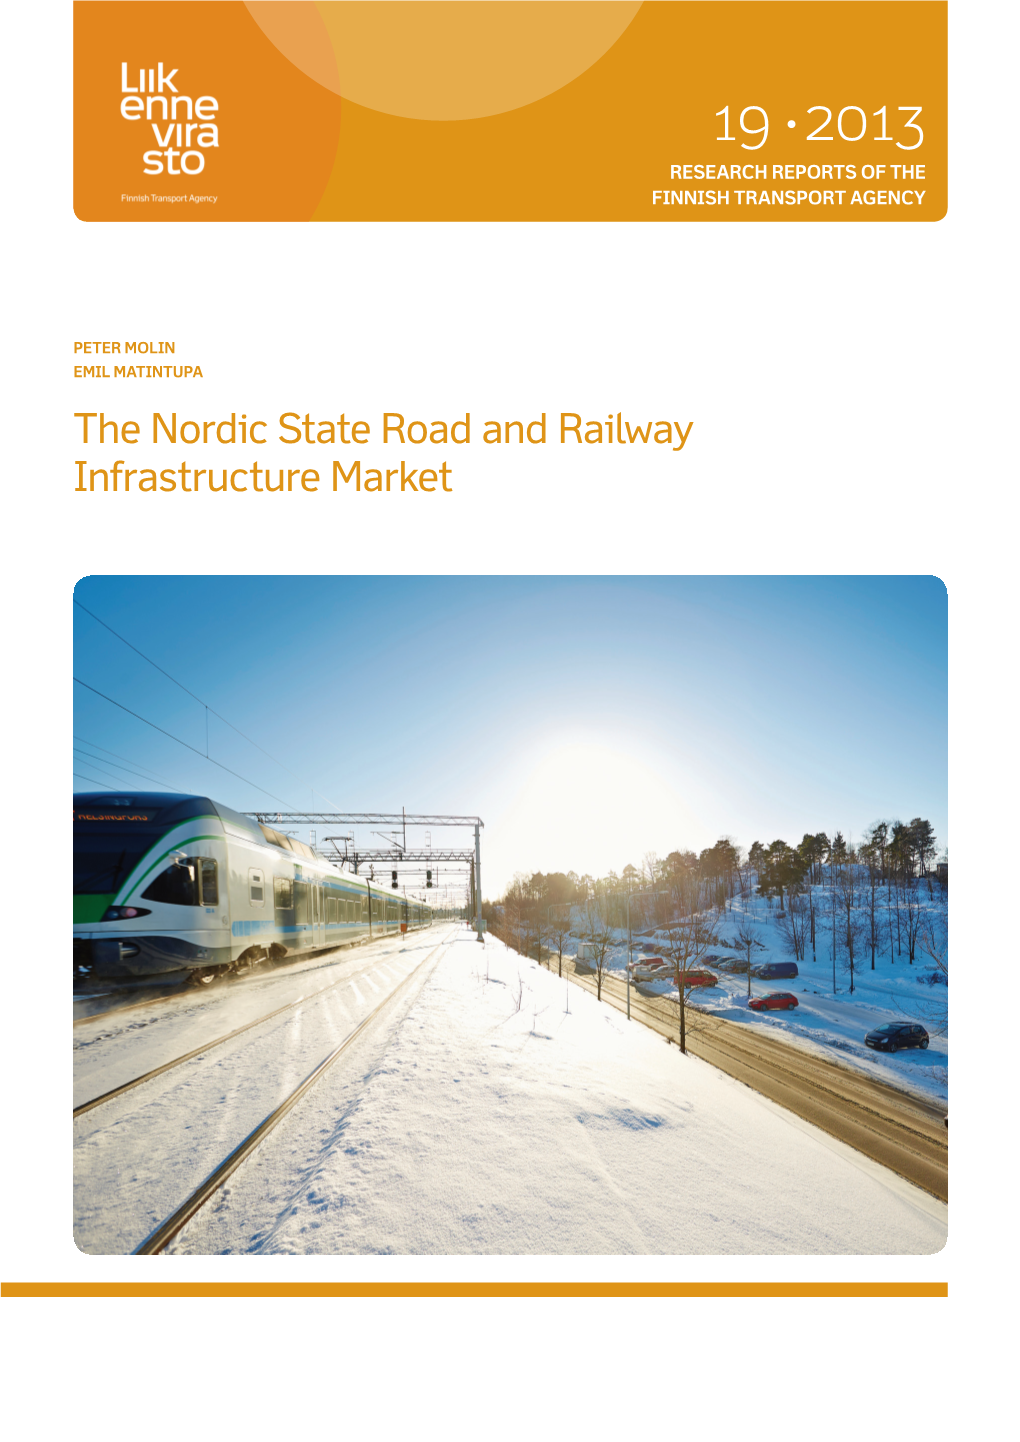 The Nordic State Road and Railway Infrastructure Market